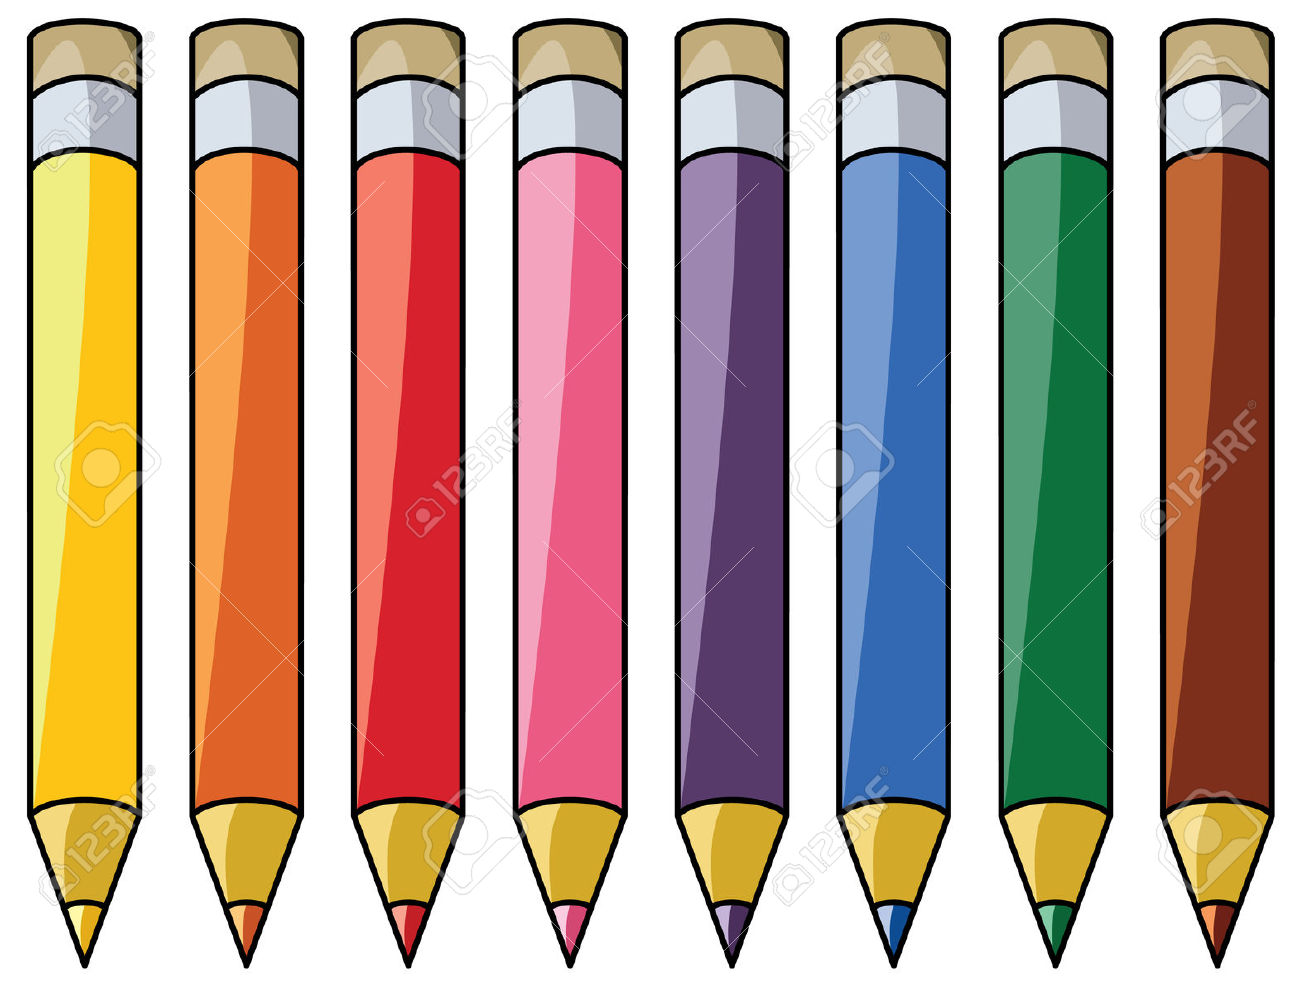 Colourful pencils clipart royalty free cliparts vectors and